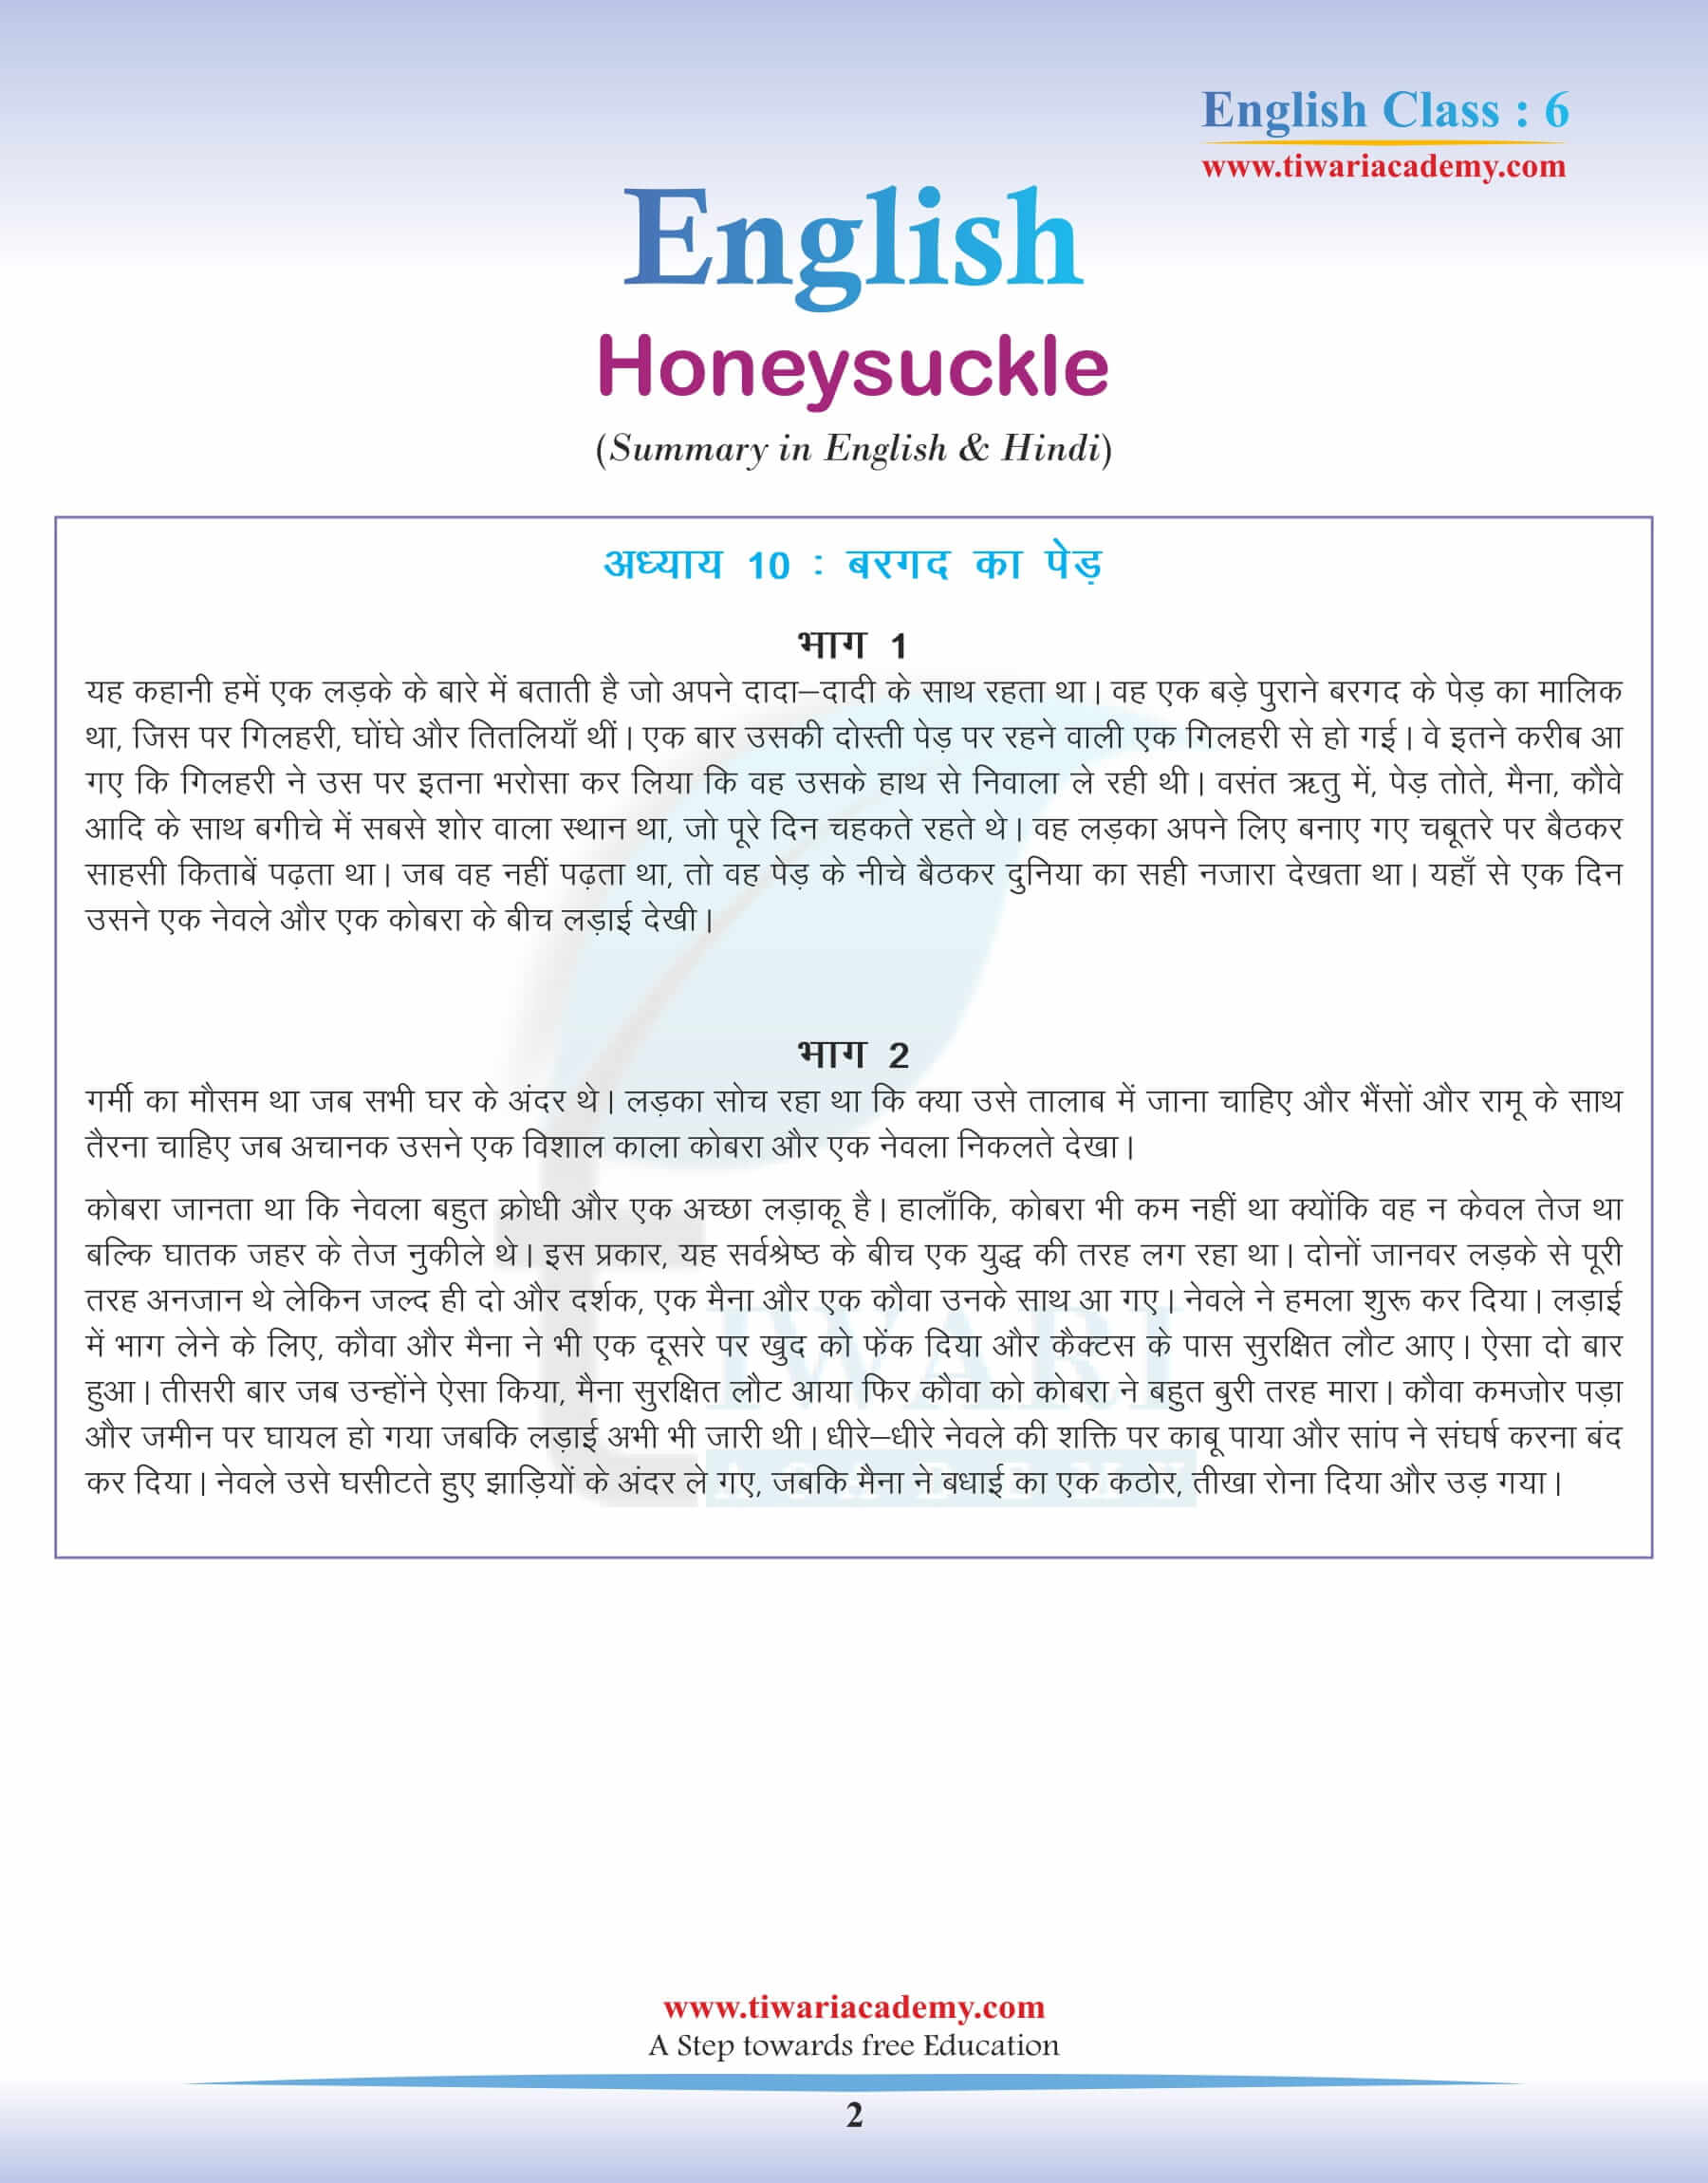 Class 6 English Chapter 10 Poem Summary in Hindi and English